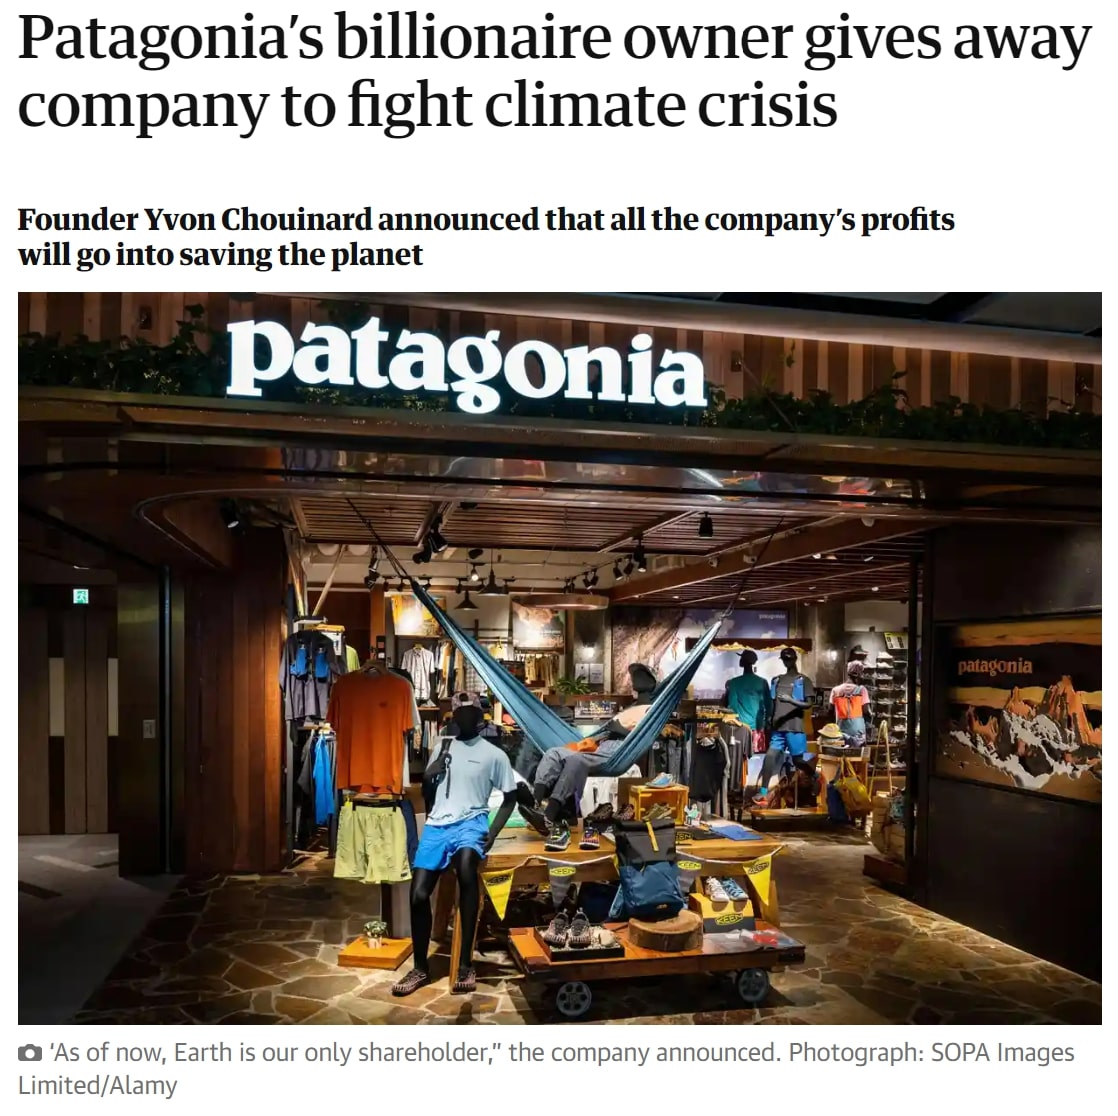 The Guardian's article on "Patagonia's billionaire owner gives away company to fight climate crisis"